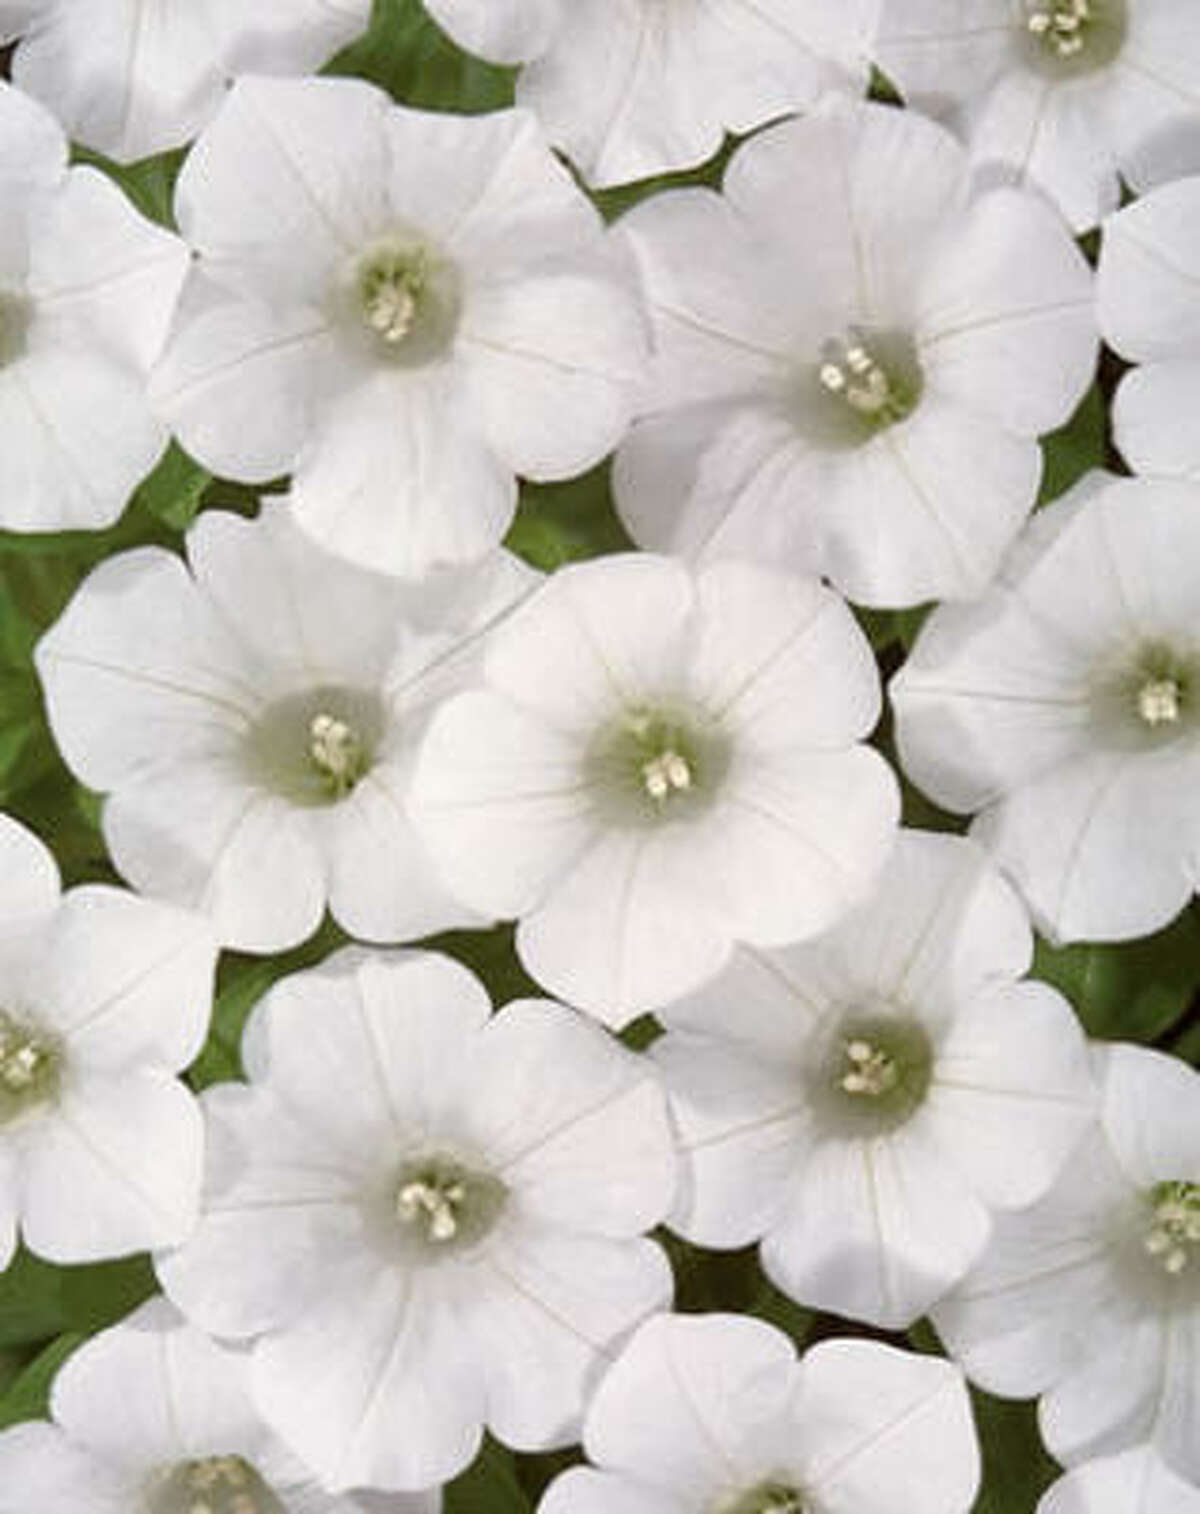 'Blanket White' petunia. Soft, fluttering petunias tumble through beds and over container lips. Create your own white winter garden | Submit your garden photos | Houston Plant Database | HoustonGrows.com